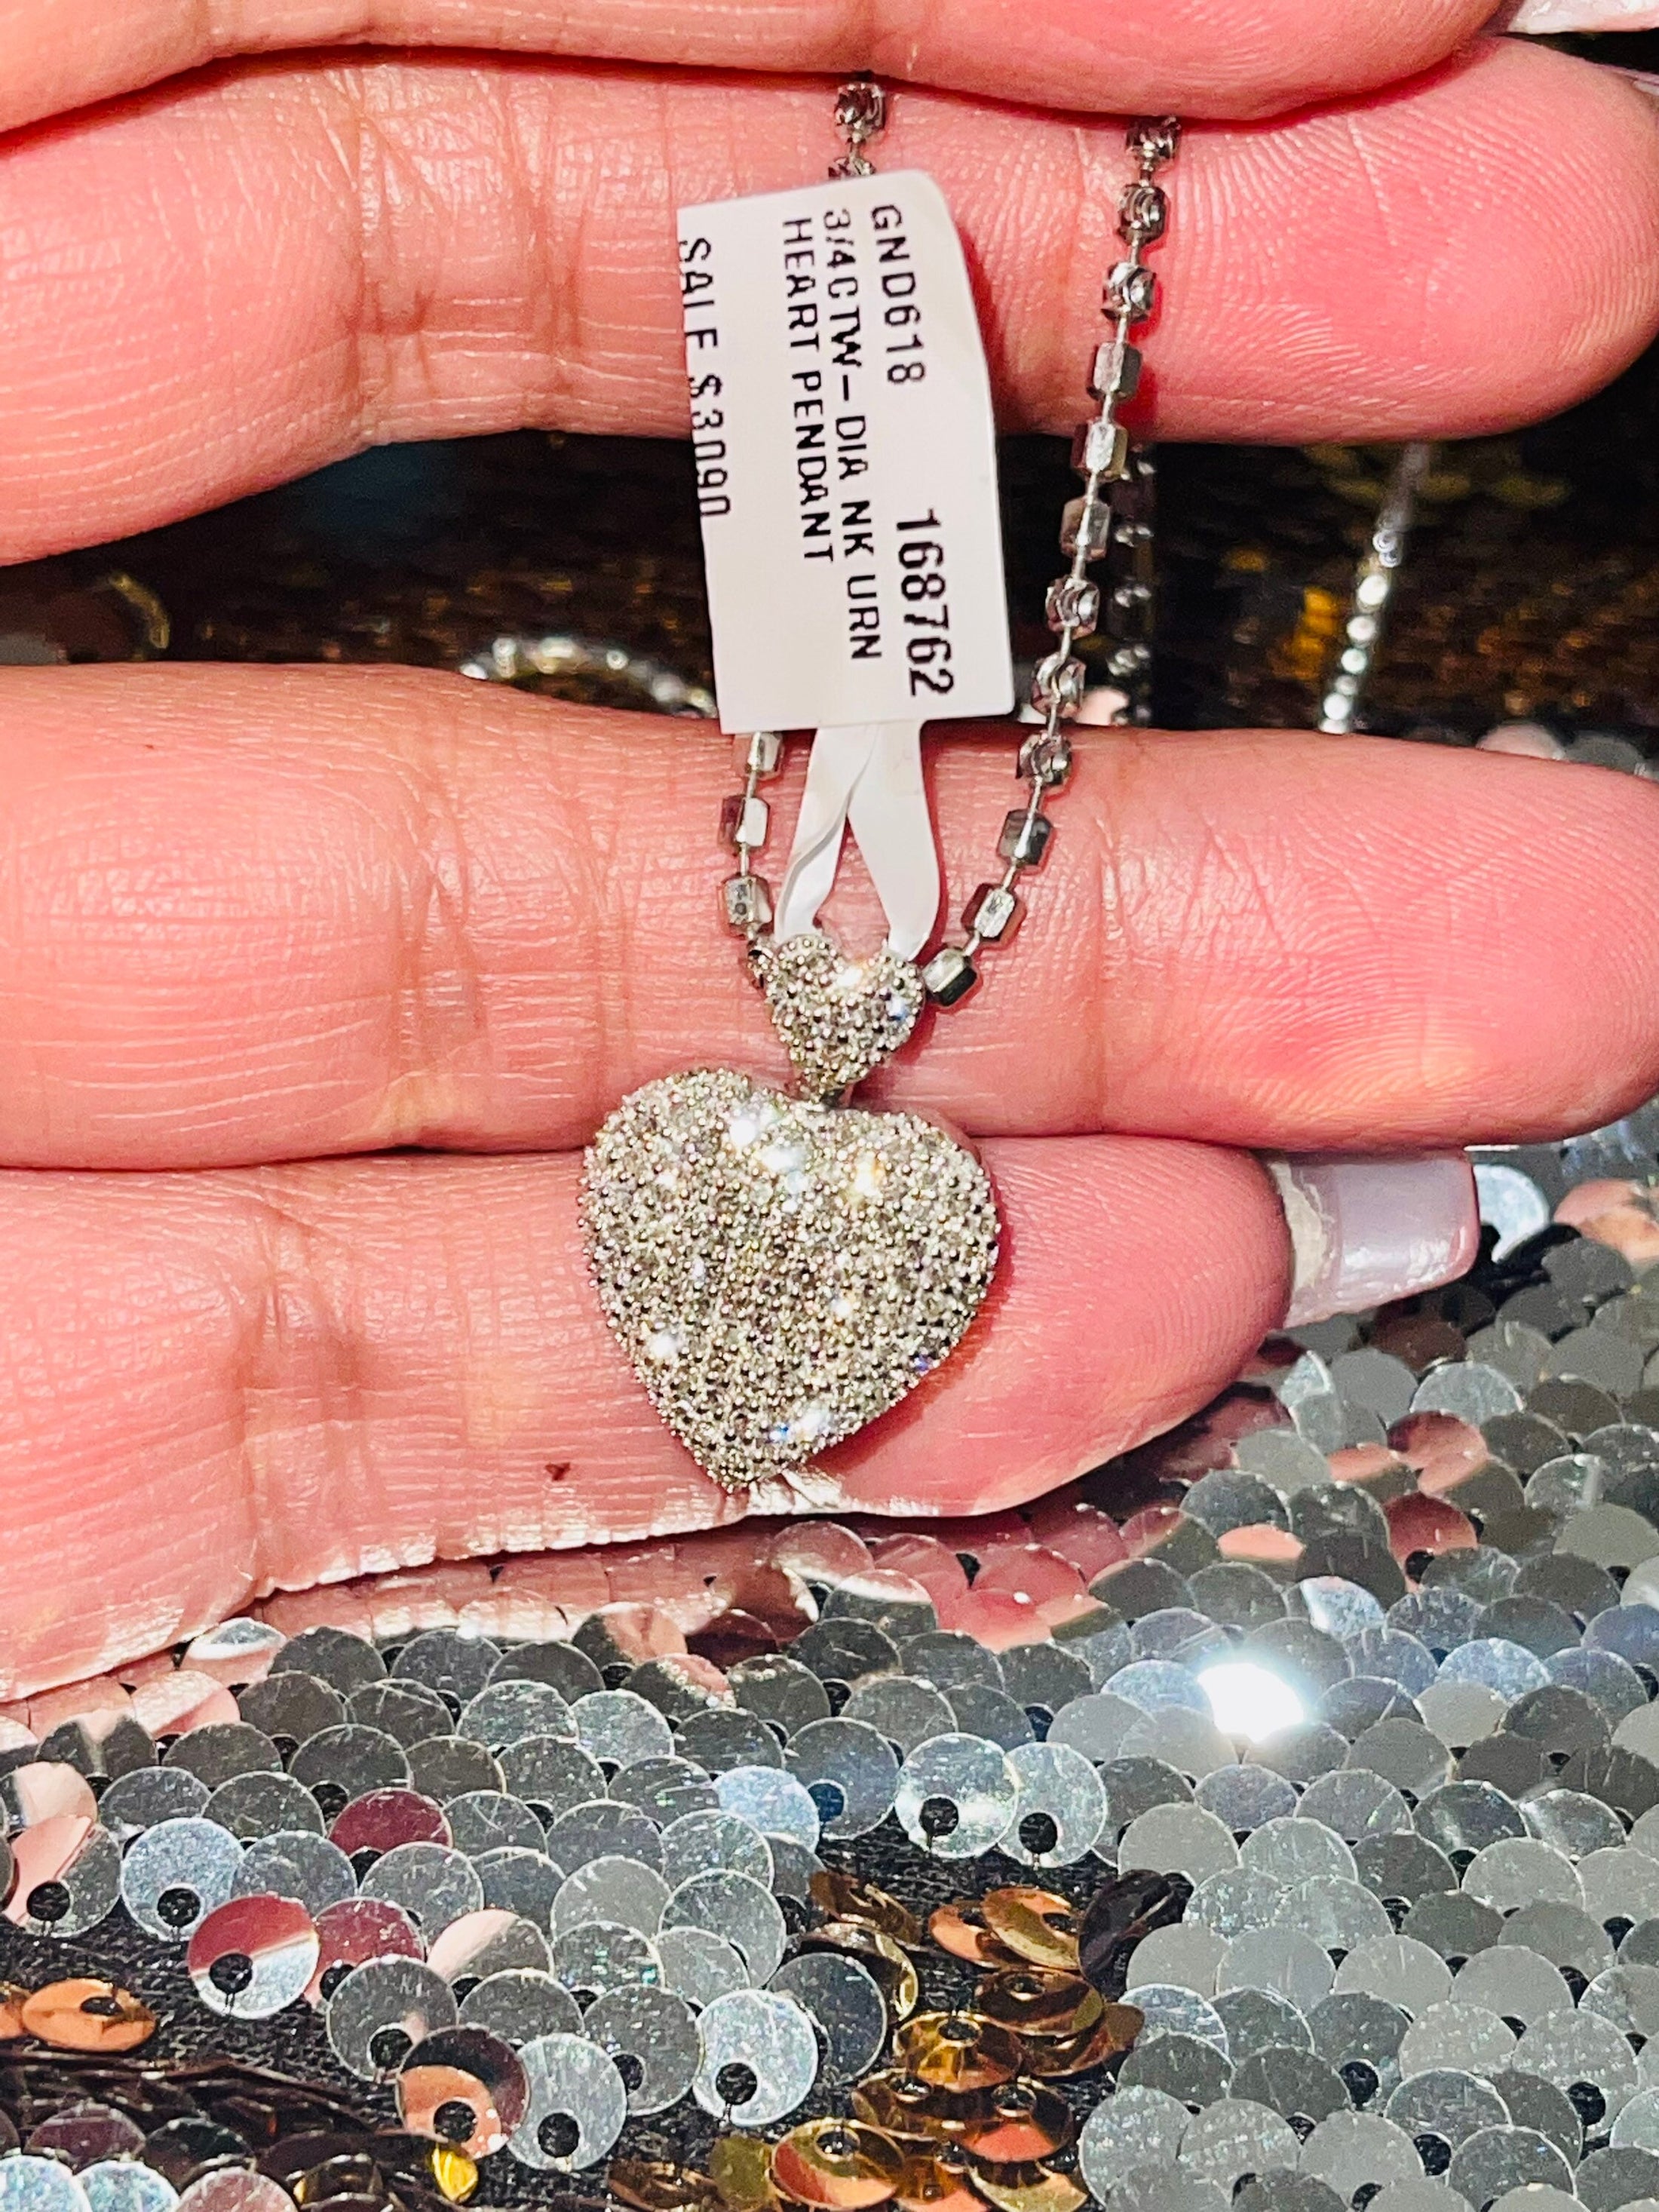 Real White Gold Urns | Real Diamond Cremation Urn | Urn Necklace For Ashes 10k solid Gold | Cremation Necklace | Keepsake Heart Urn jewelry